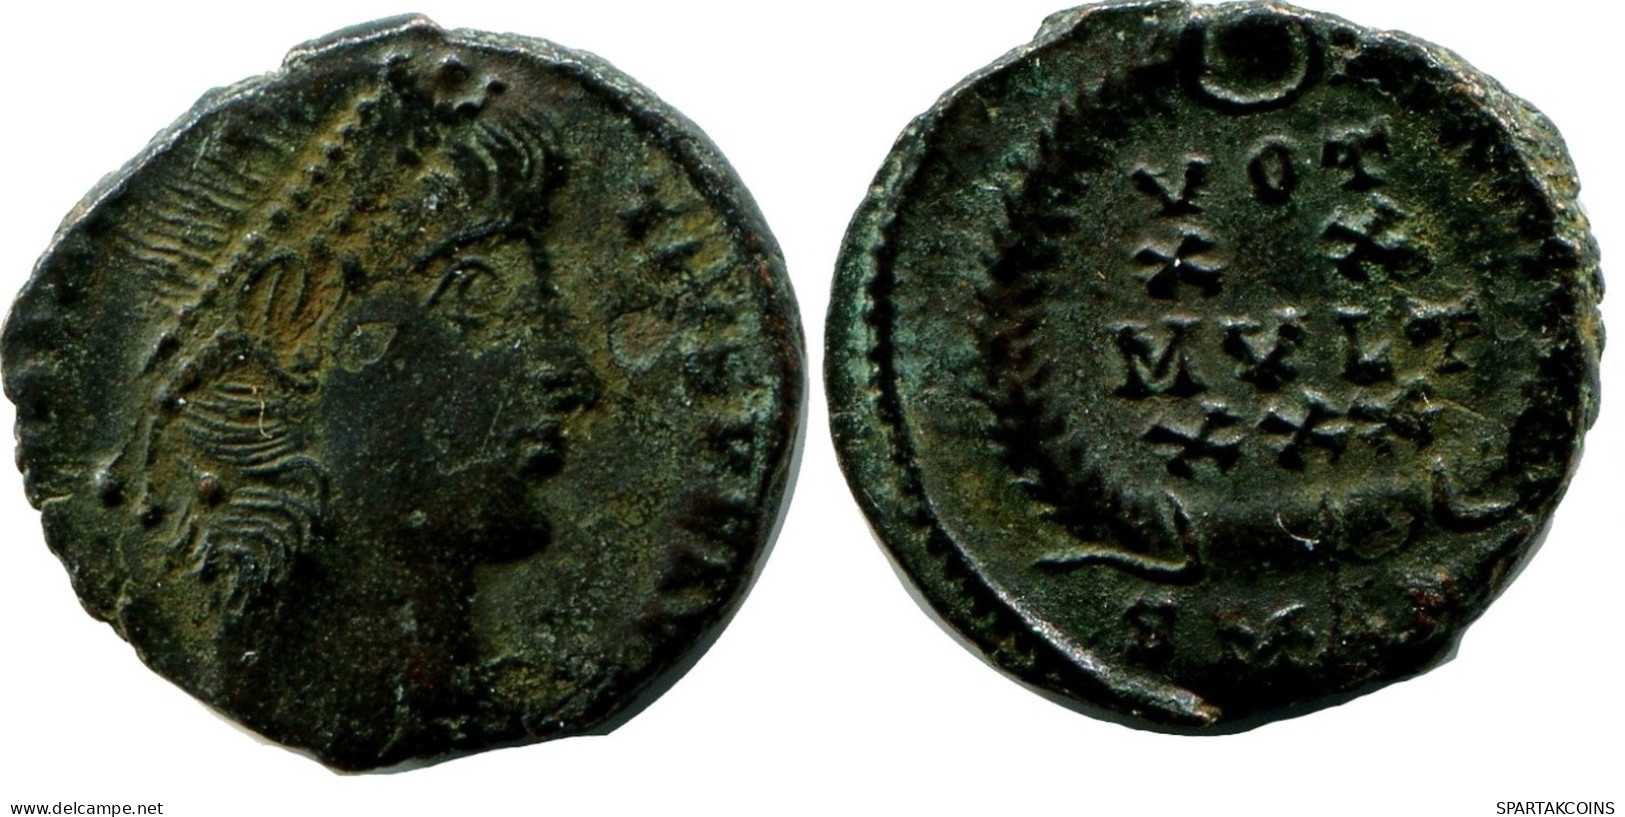 CONSTANTIUS II MINTED IN ANTIOCH FOUND IN IHNASYAH HOARD EGYPT #ANC11255.14.F.A - El Impero Christiano (307 / 363)